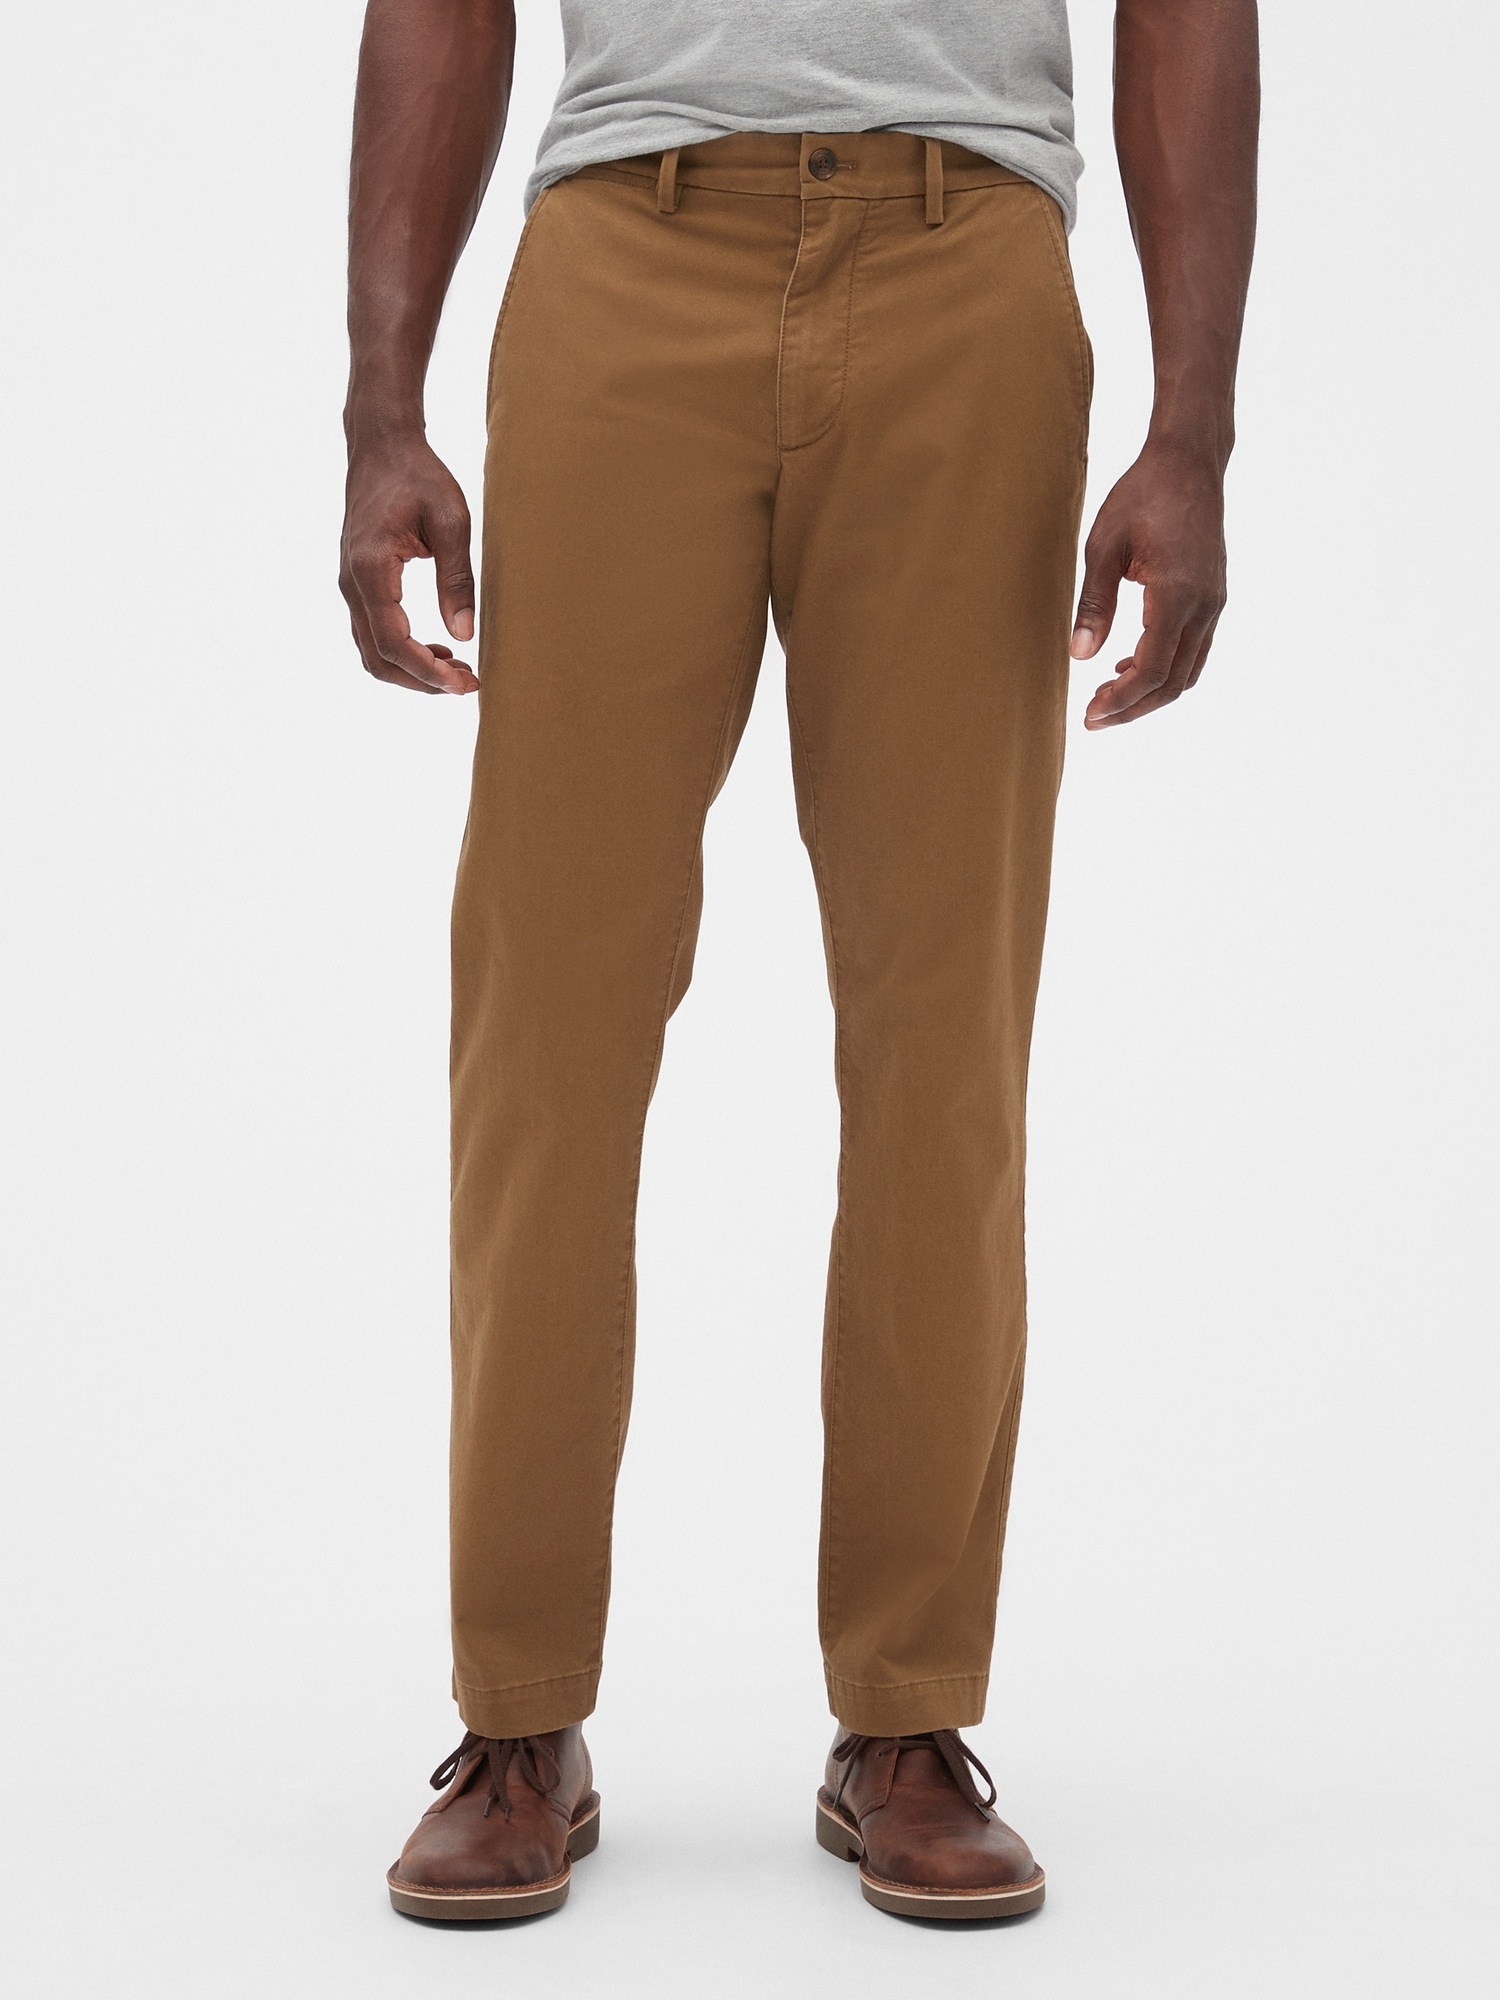 Essential Khakis in Straight Fit with GapFlex | Gap Factory